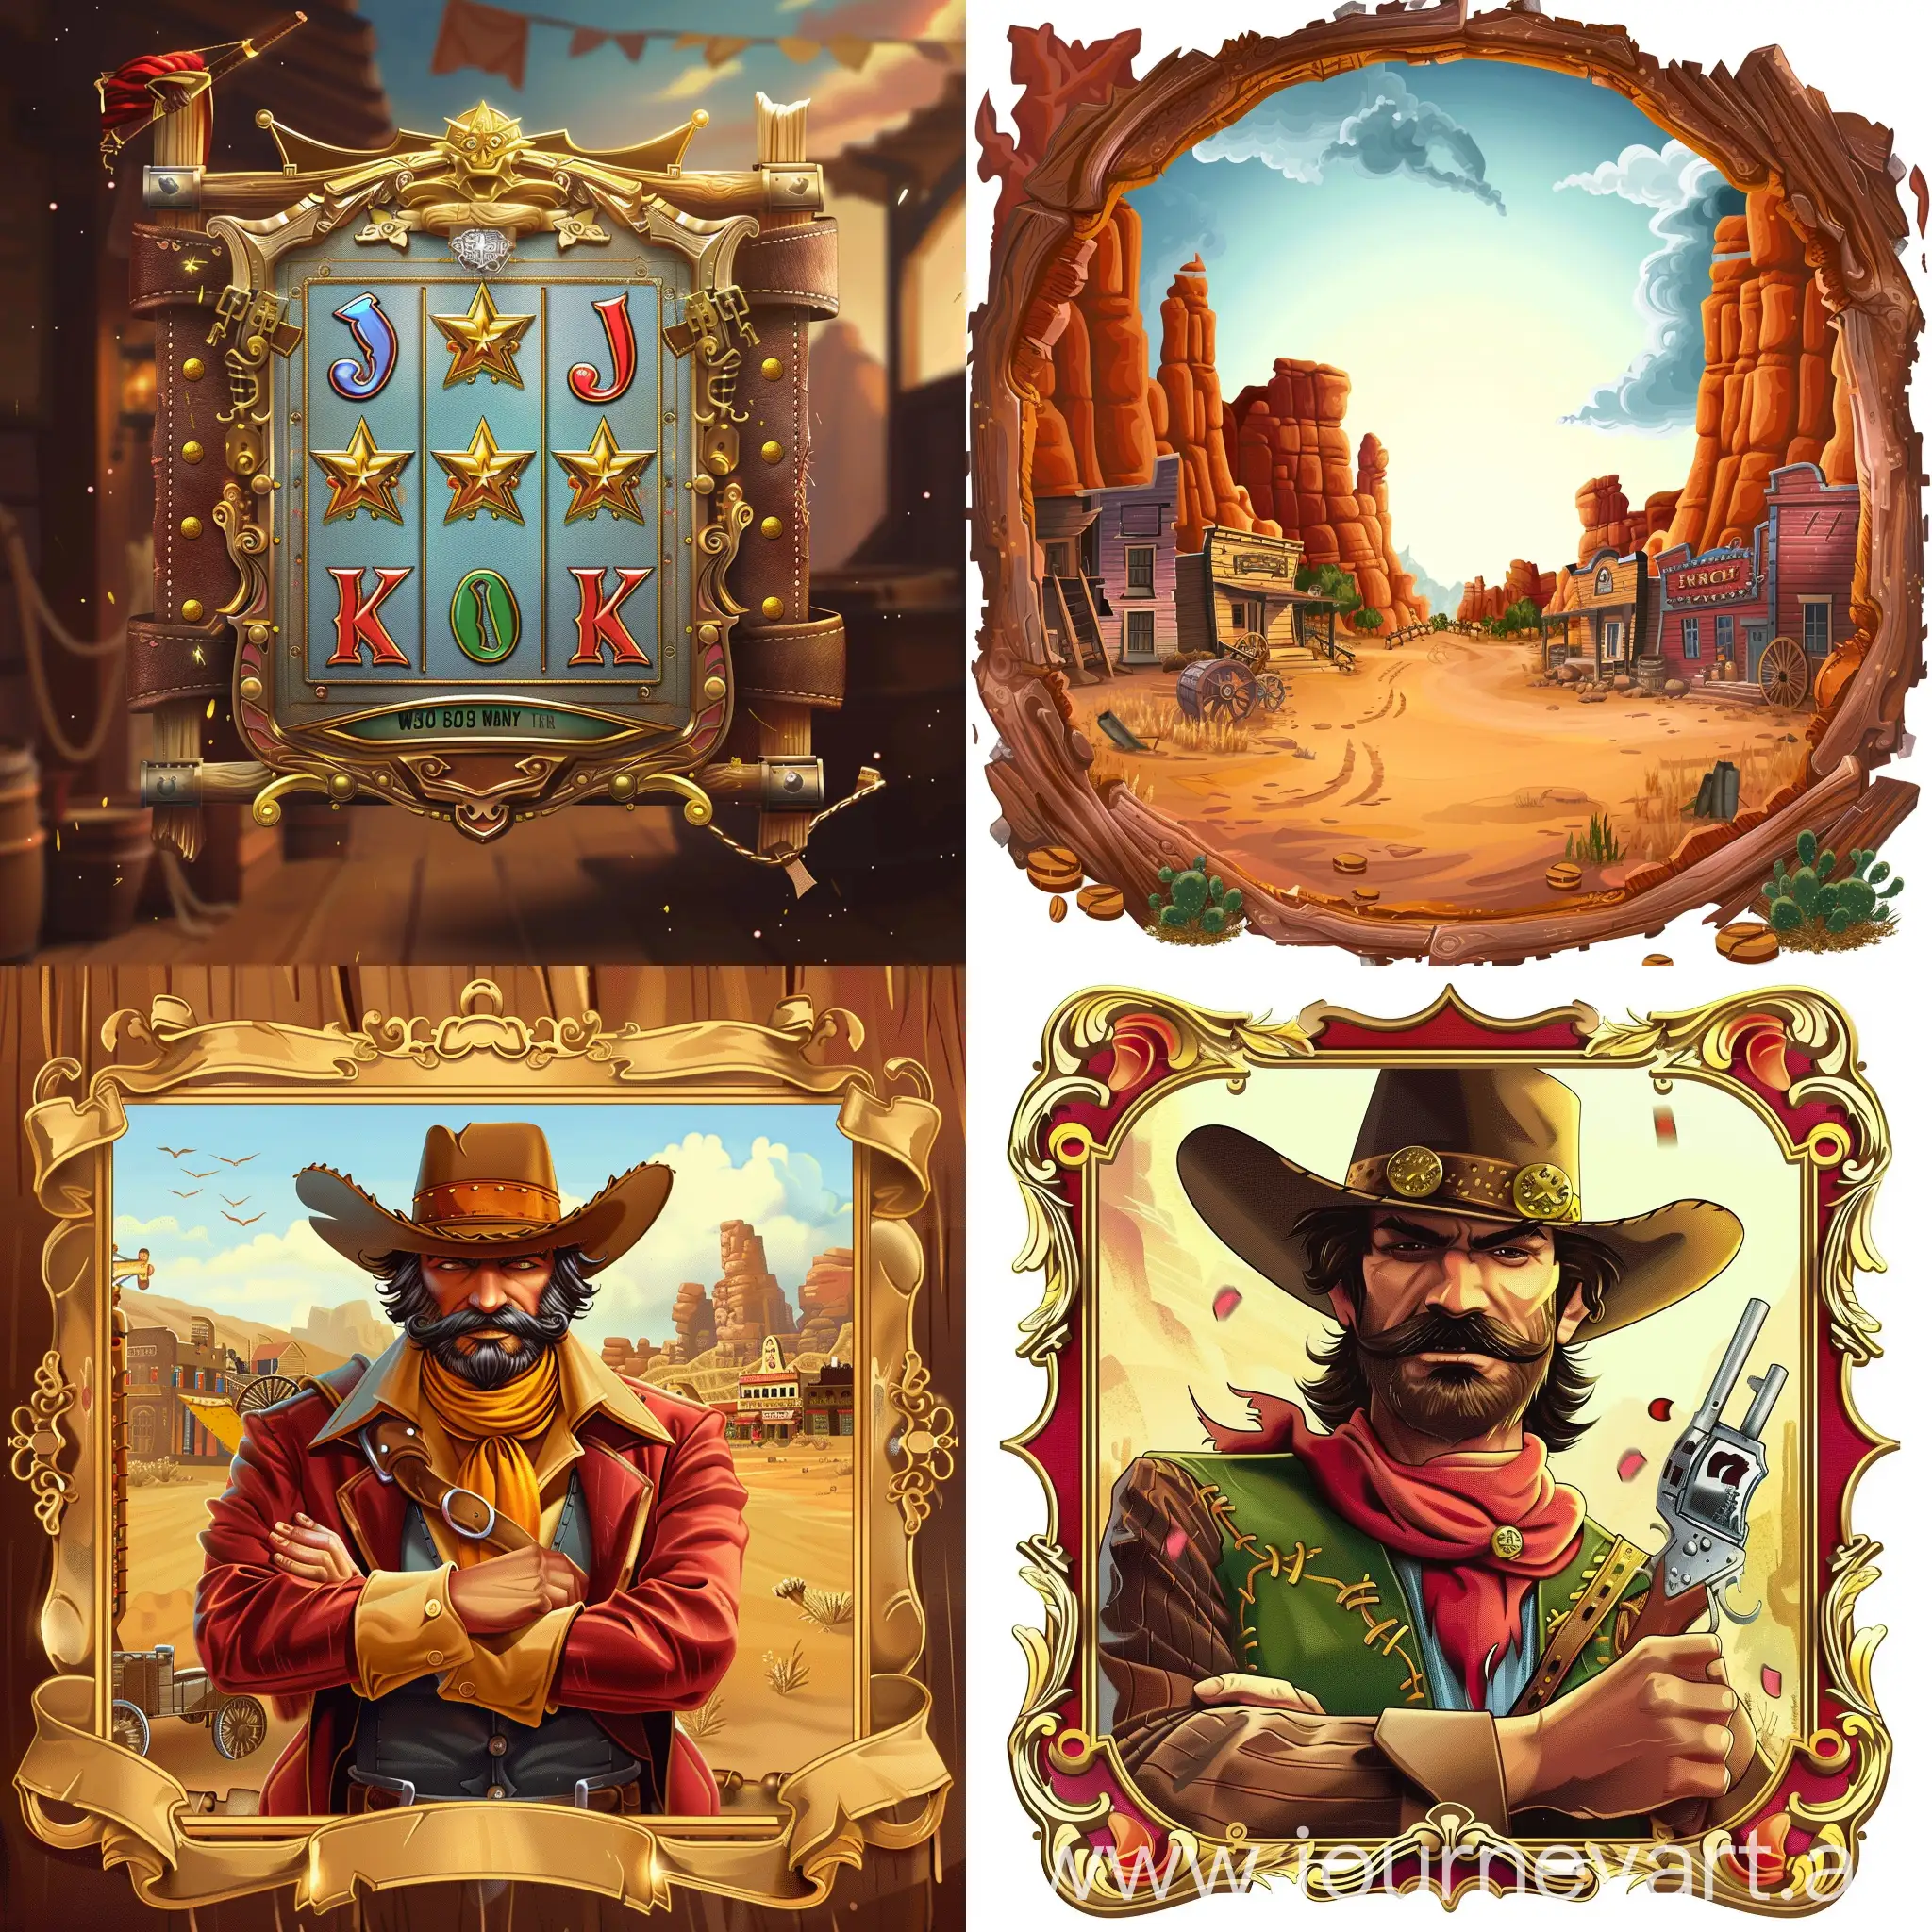 Frame for slot game symbol in a wild west slot game style